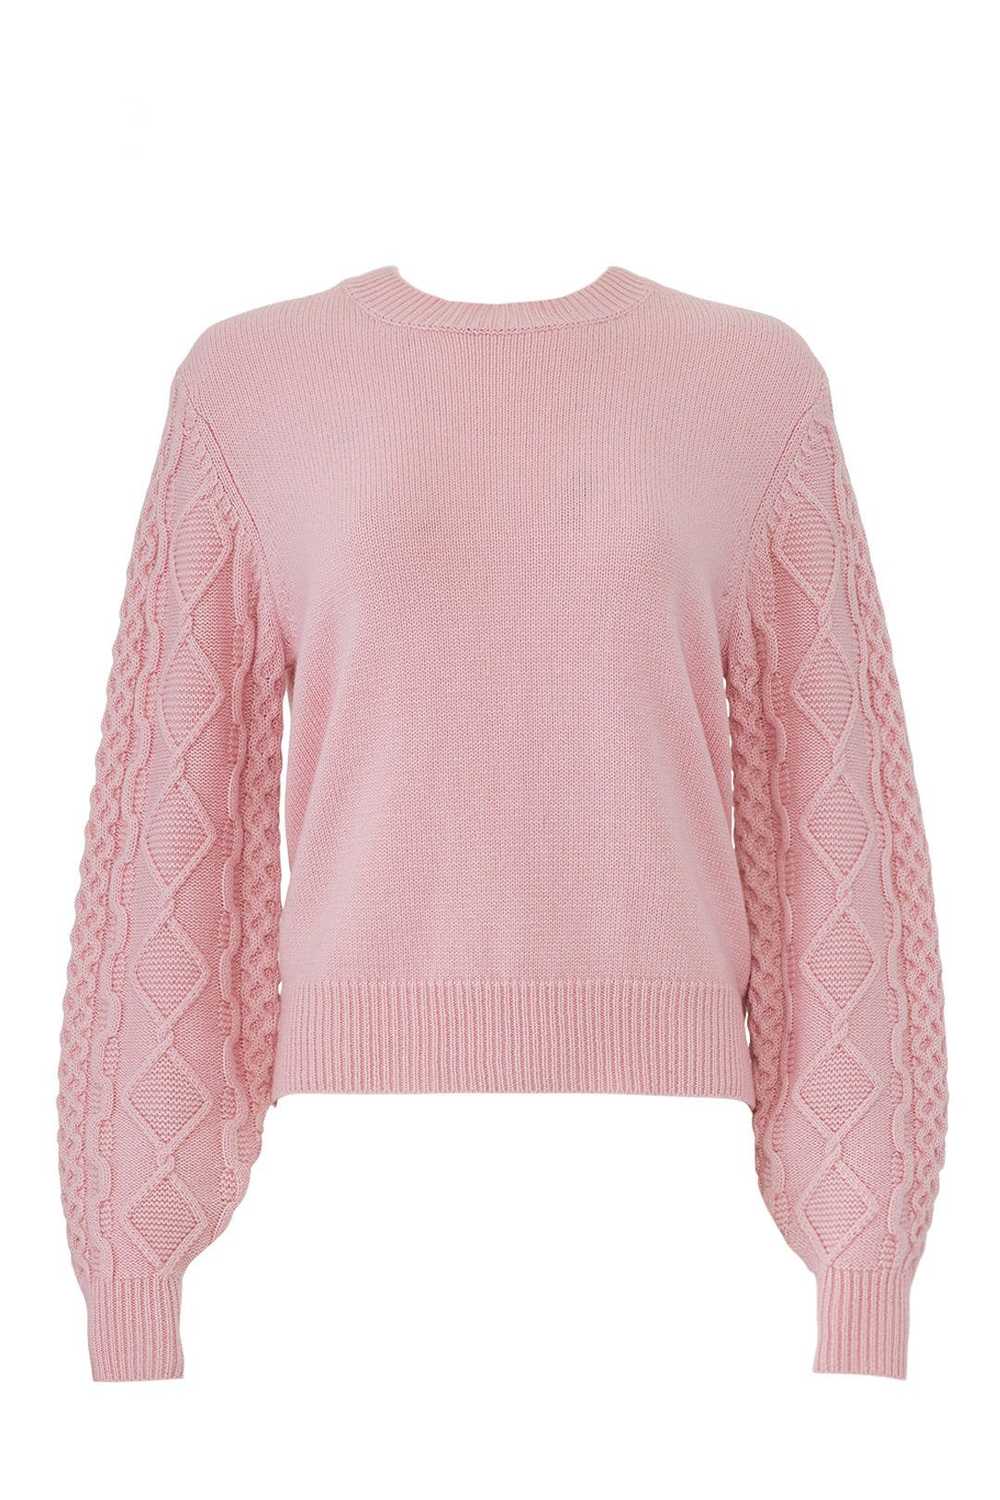 Rebecca Minkoff Pink Penny Cable Sweater - image 4